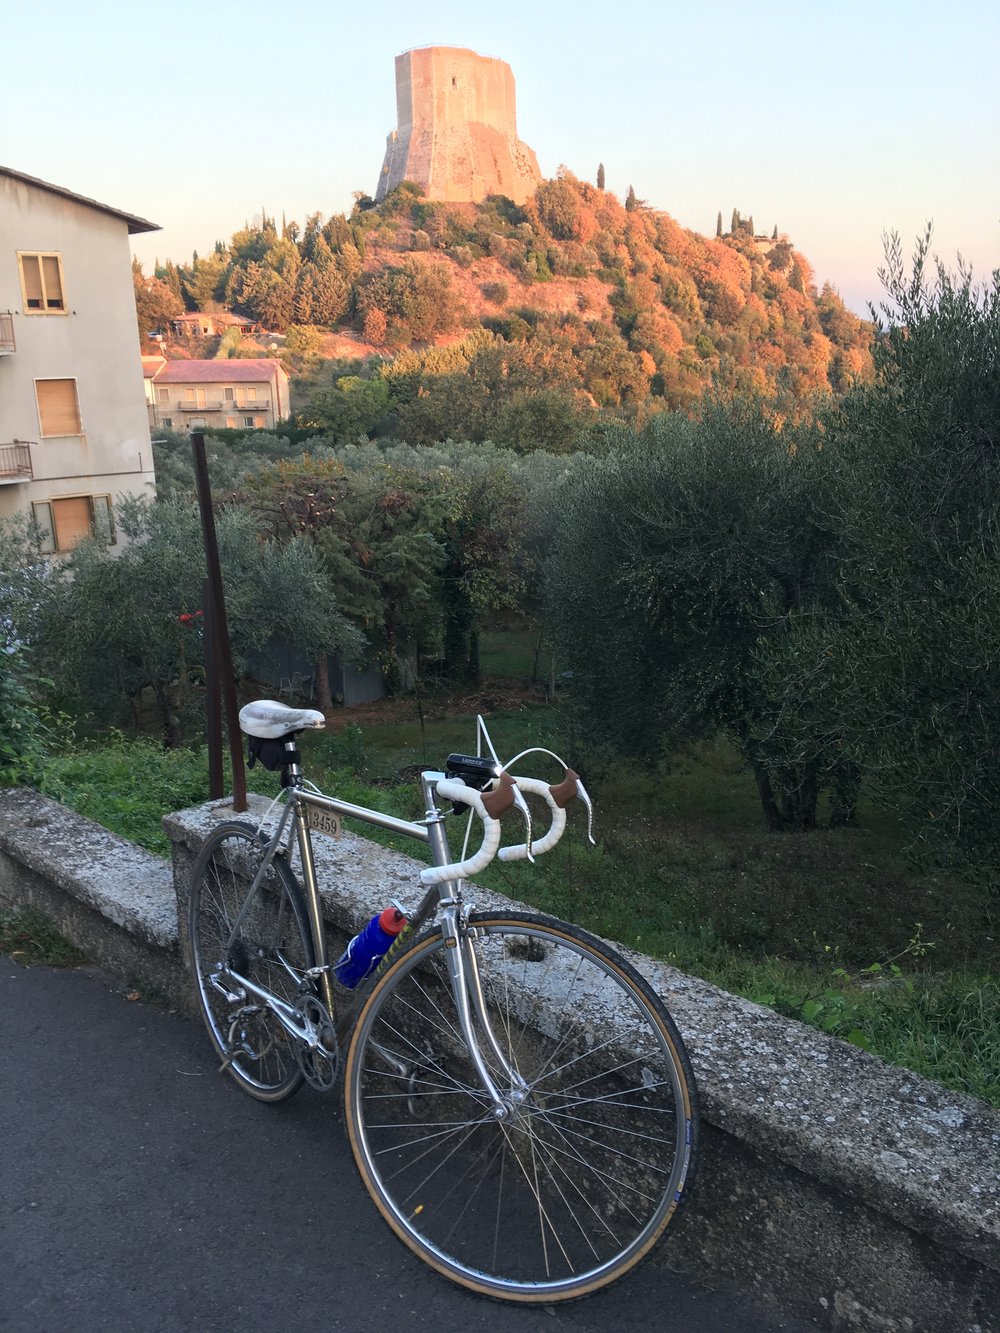 Early morning cycle climb up 340m to the high Rocca di Tentennano